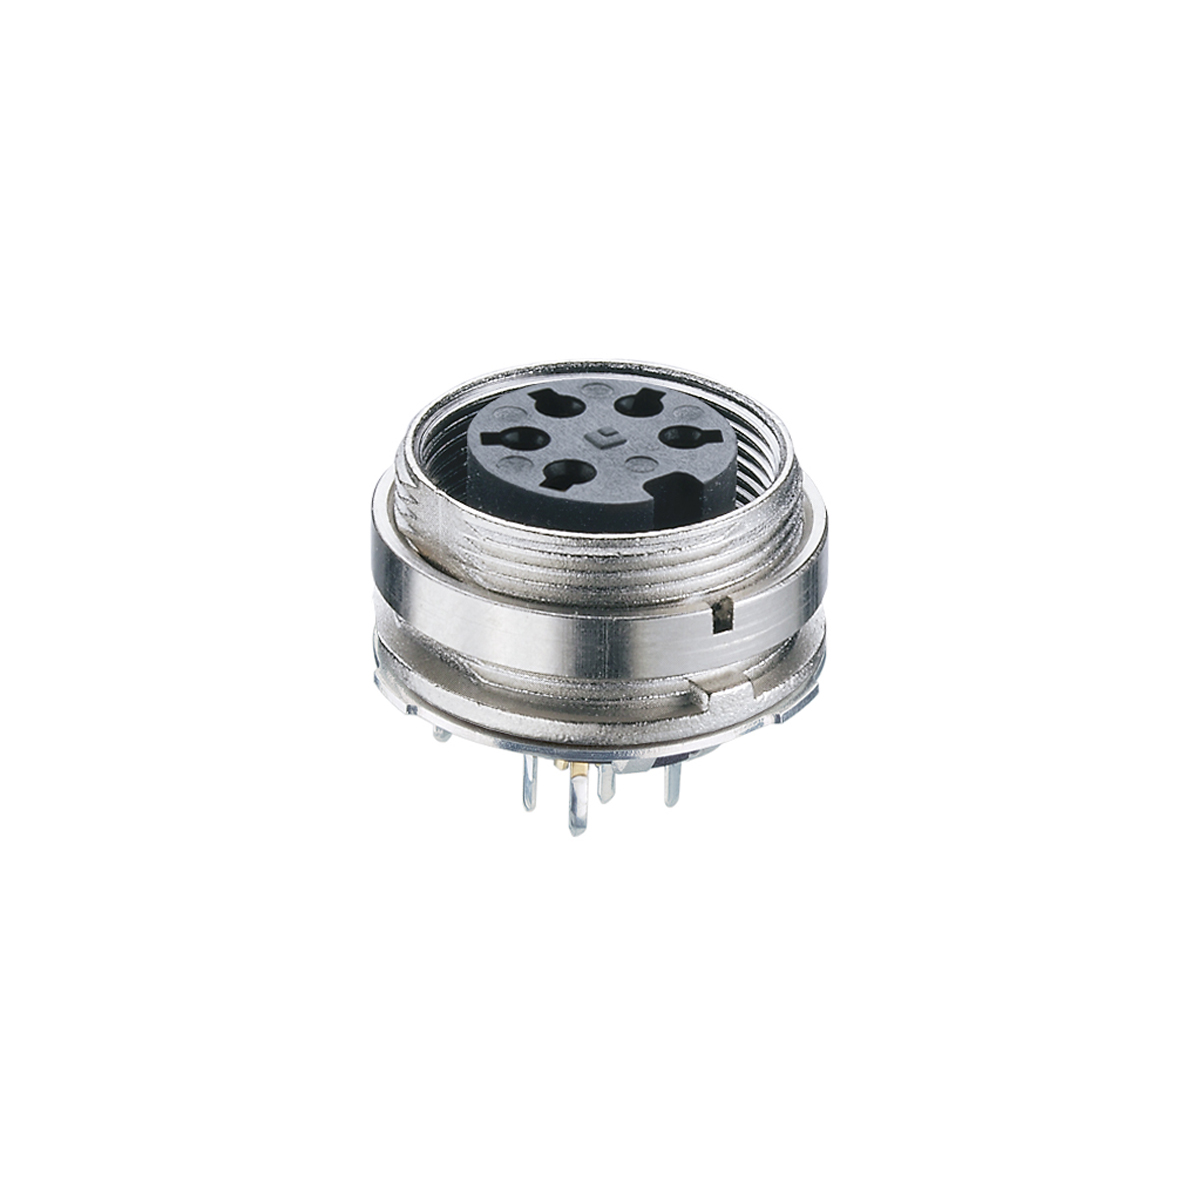 Lumberg: 30398 (Series 03 | Circular connectors with threaded joint M16 acc. to IEC 61076-2-106, IP40/IP68)